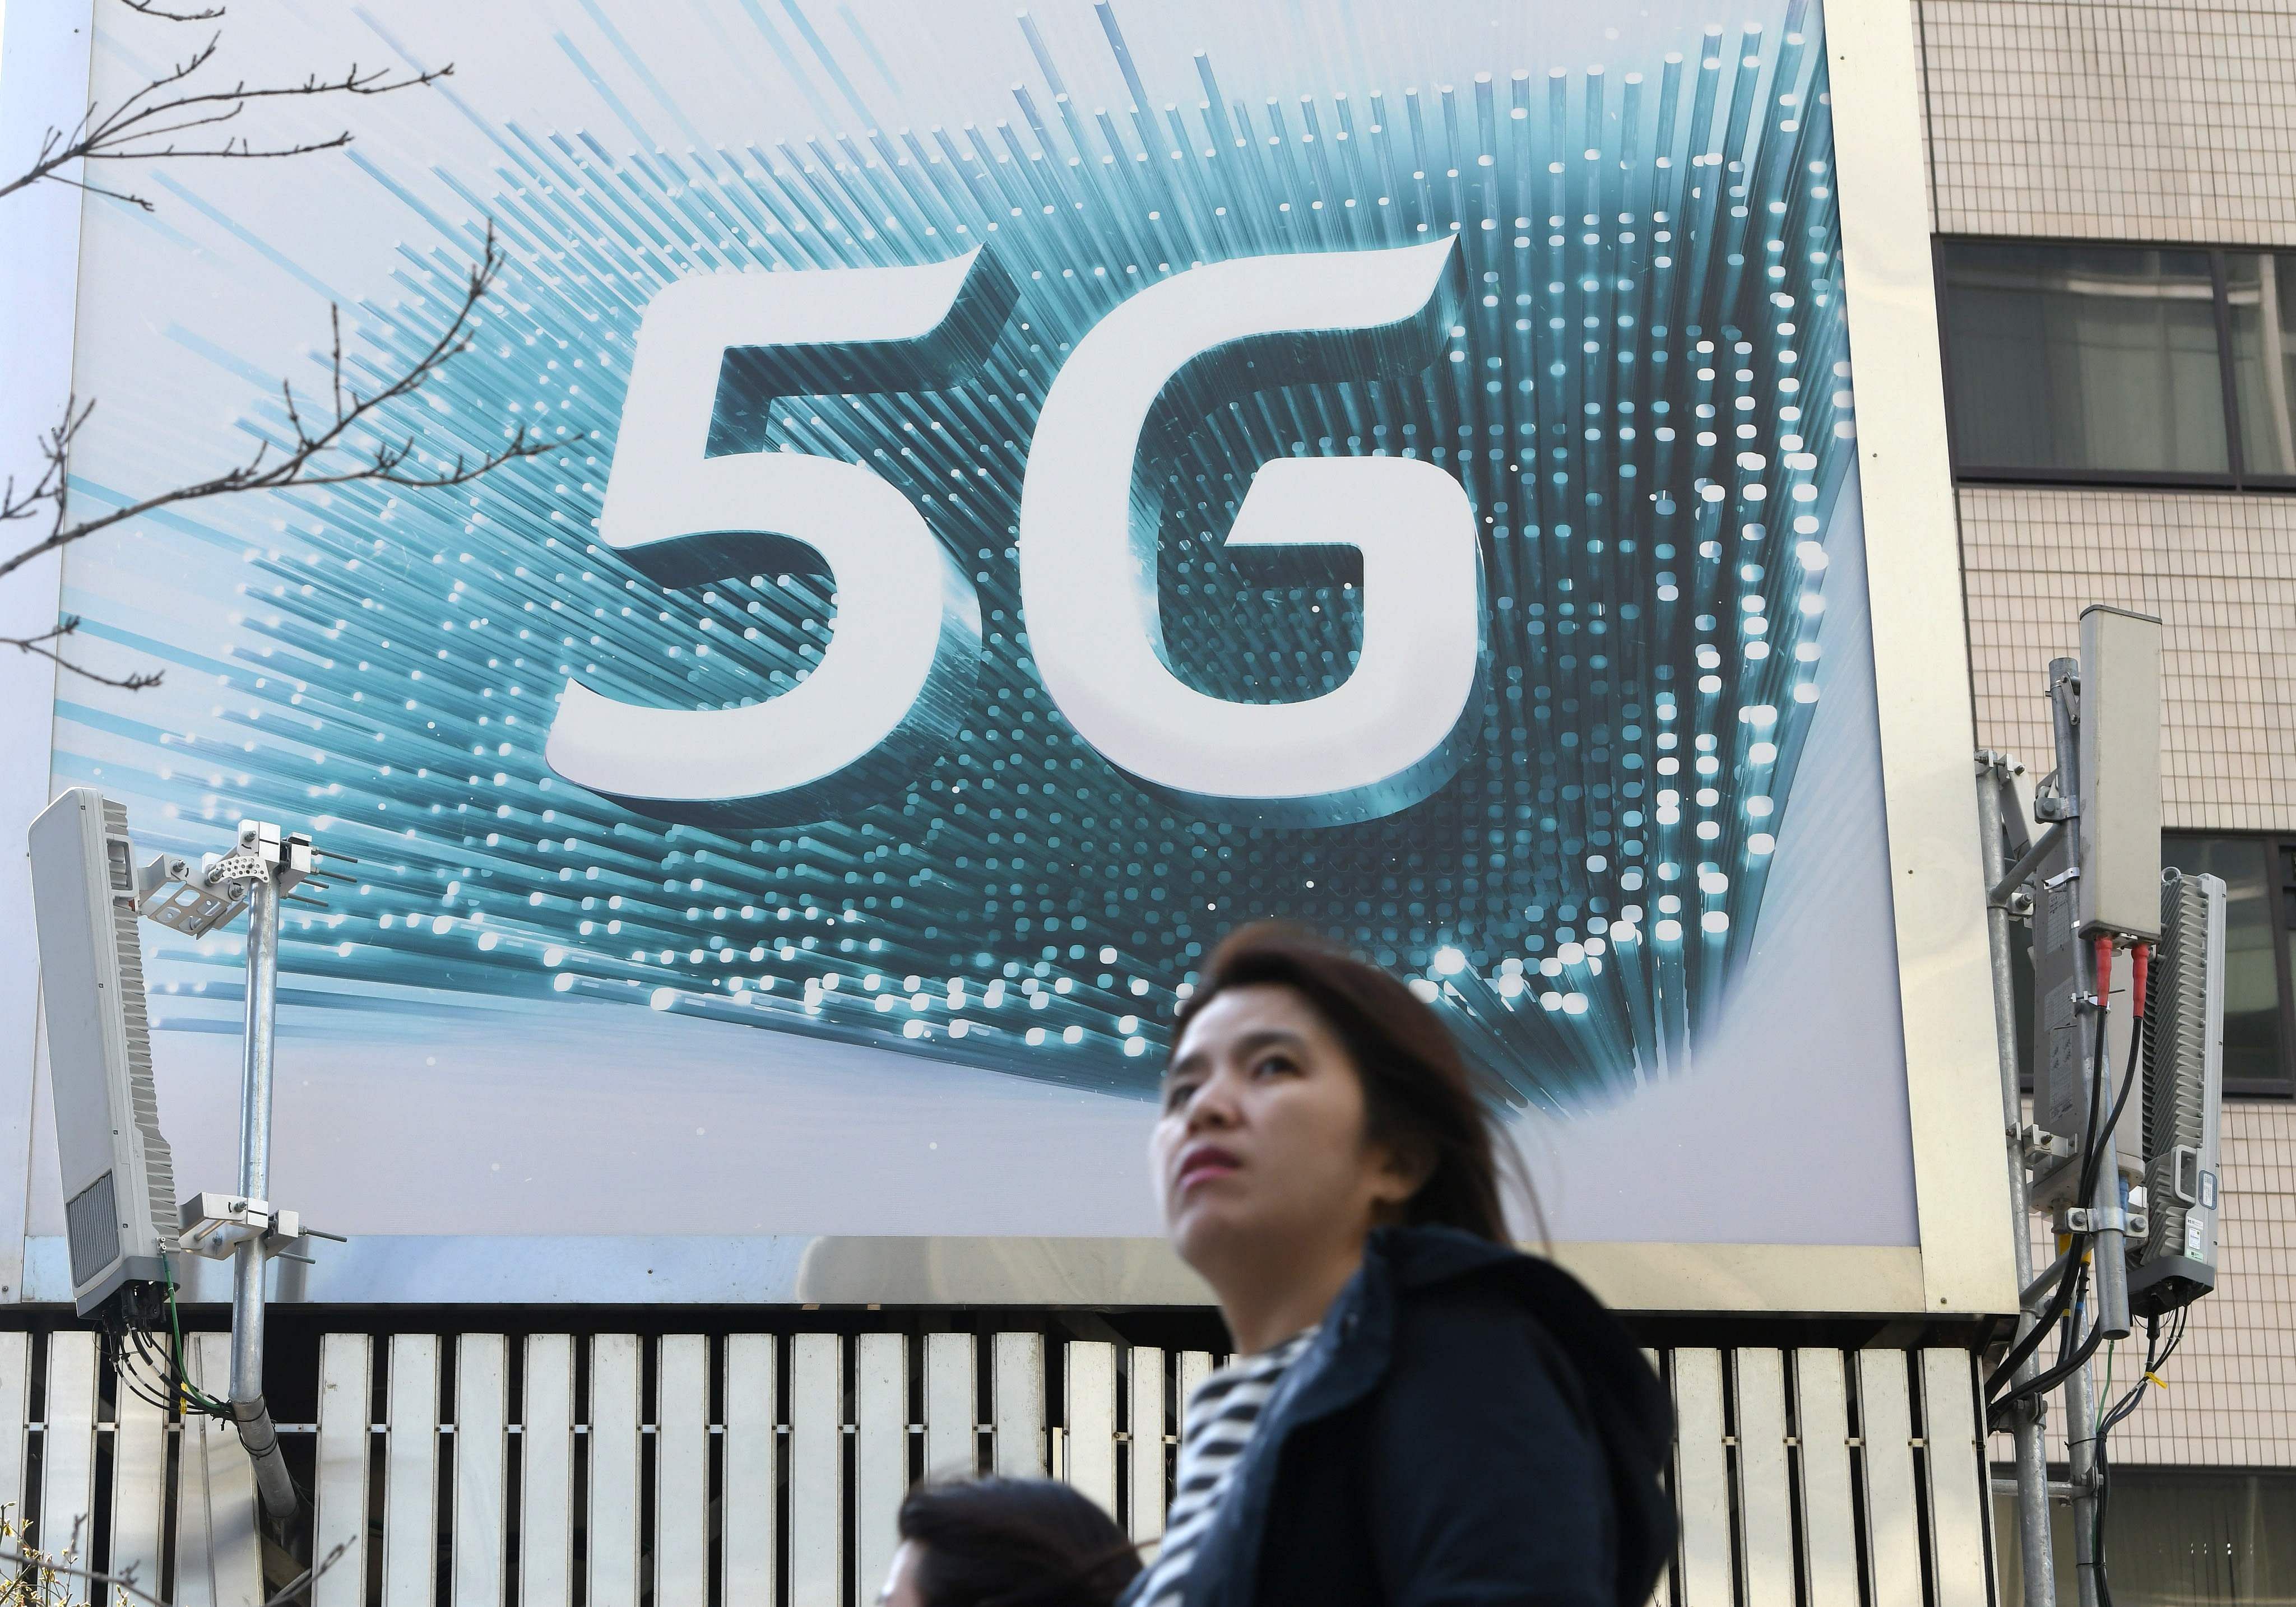 A woman walks past an advertisement for the 5G mobile networks service of KT in Seoul. (Credit: AFP)